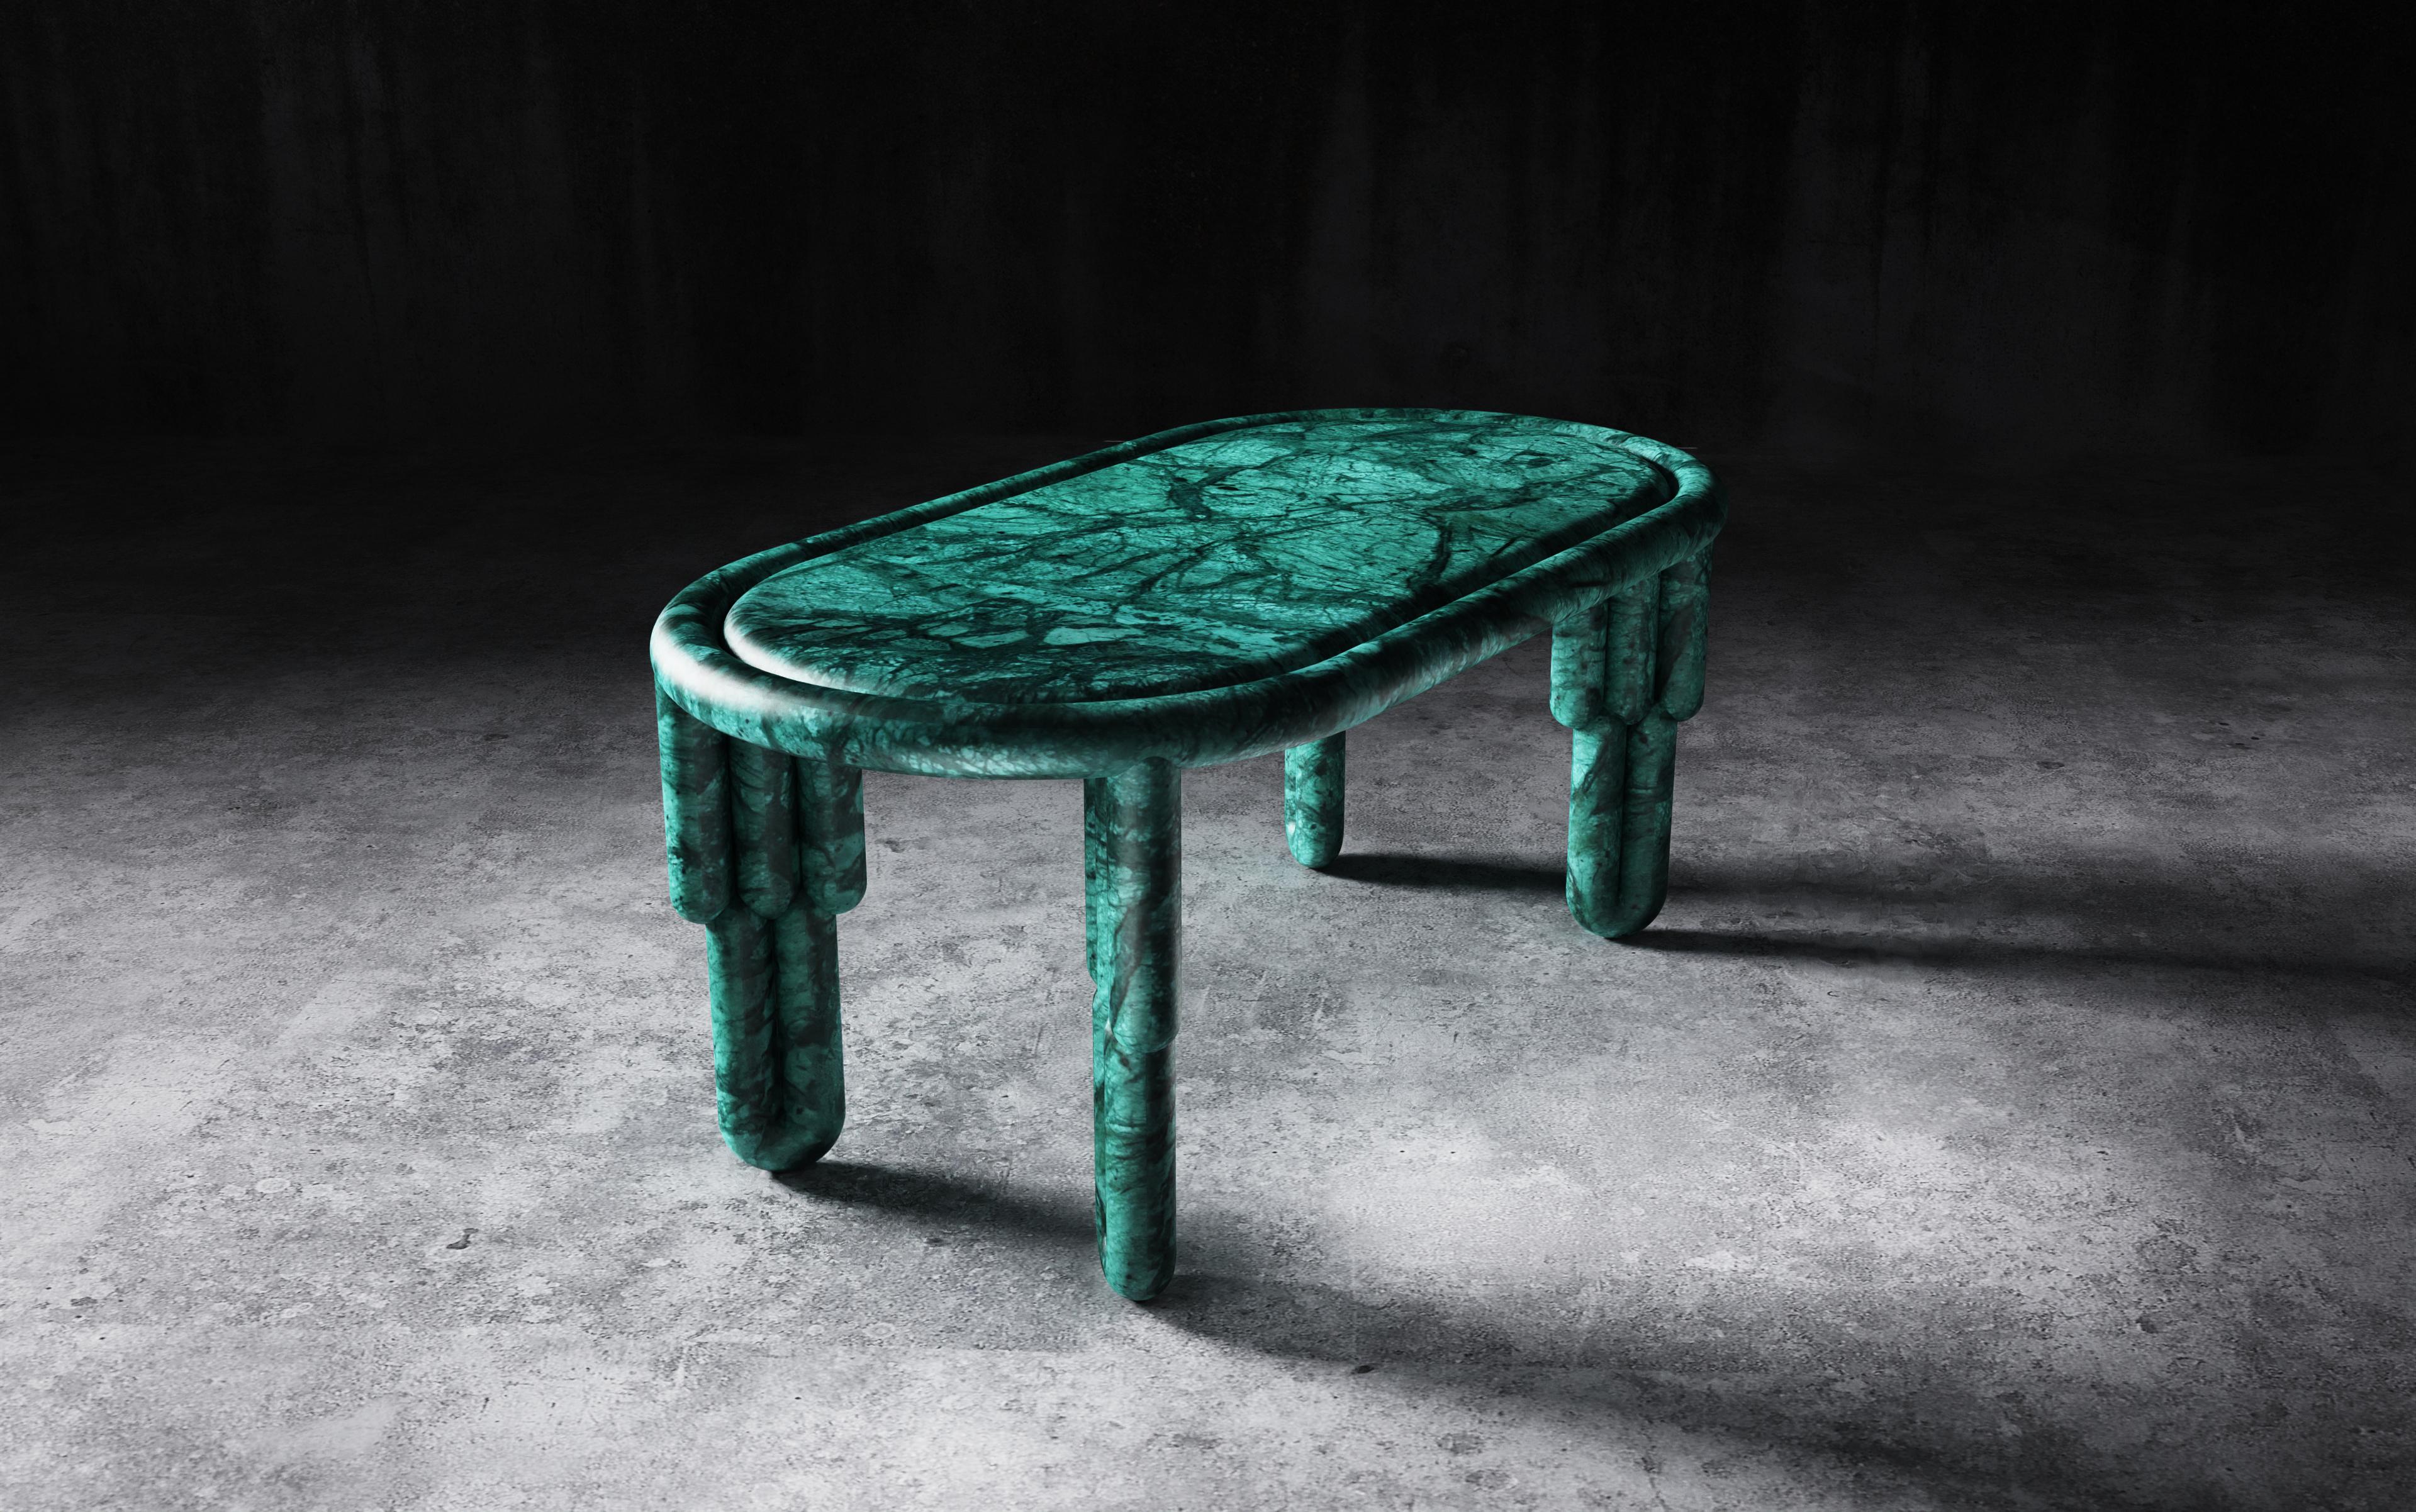 Portuguese Sculptural Kipferl Dining Table by Lara Bohinc in Verde Alpi Marble For Sale